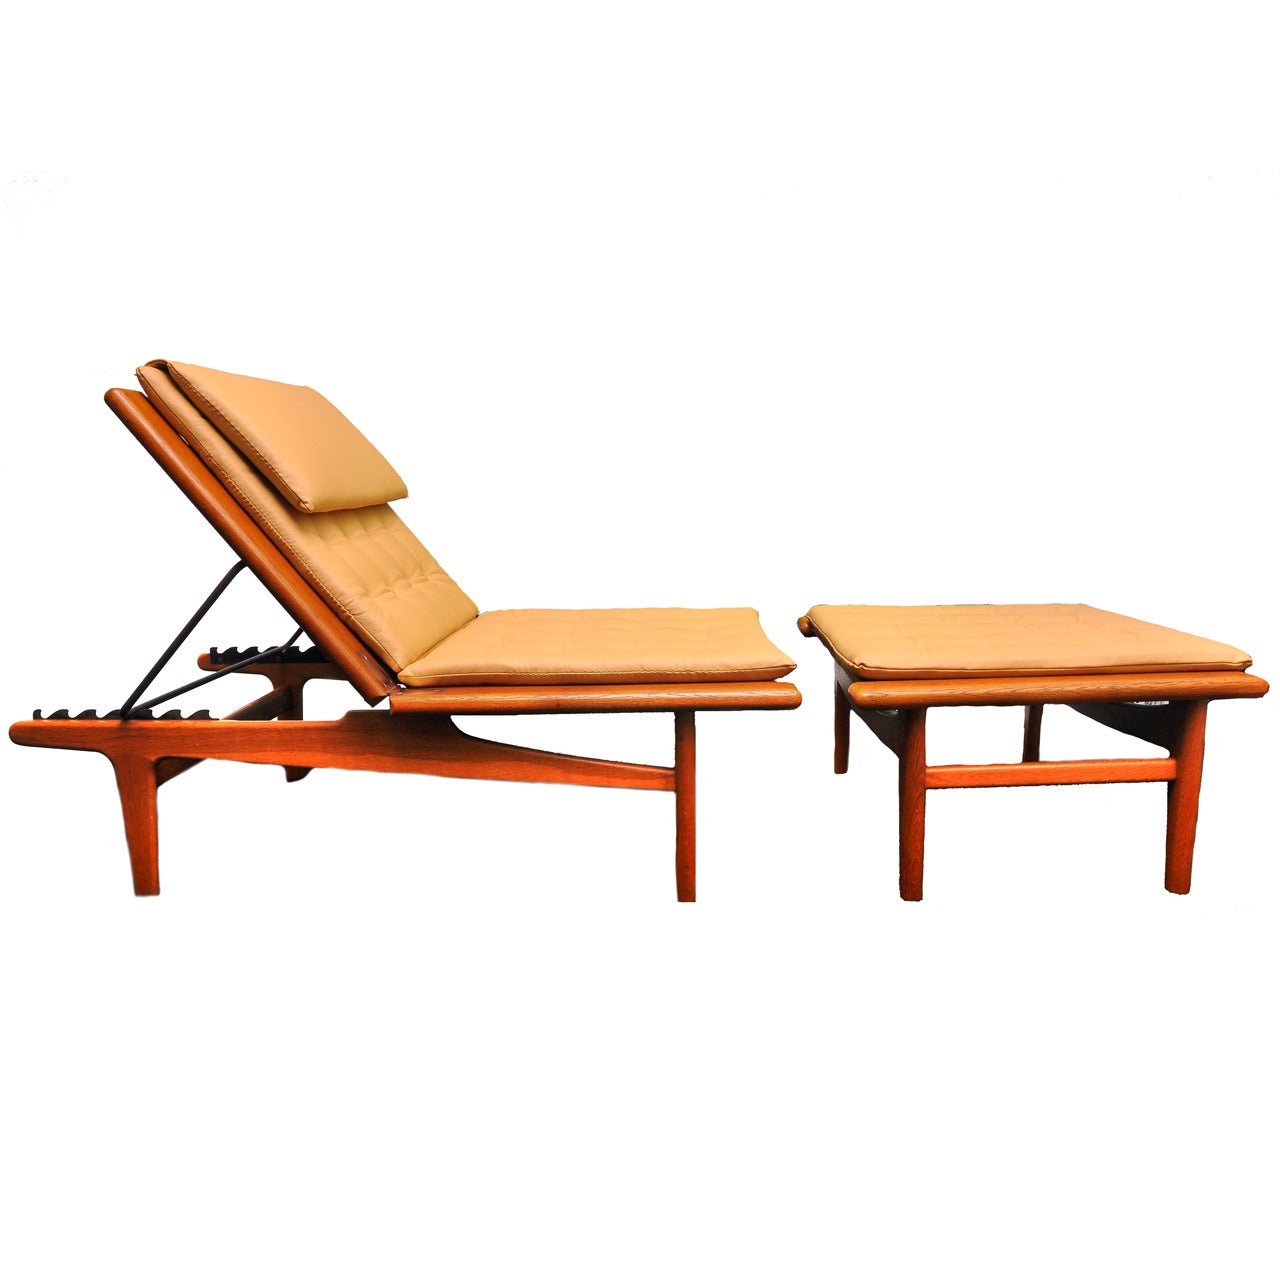 Outstanding Hans Wegner Lounge-Chair/Daybed    (Padouk Wood and Leather) c.1954